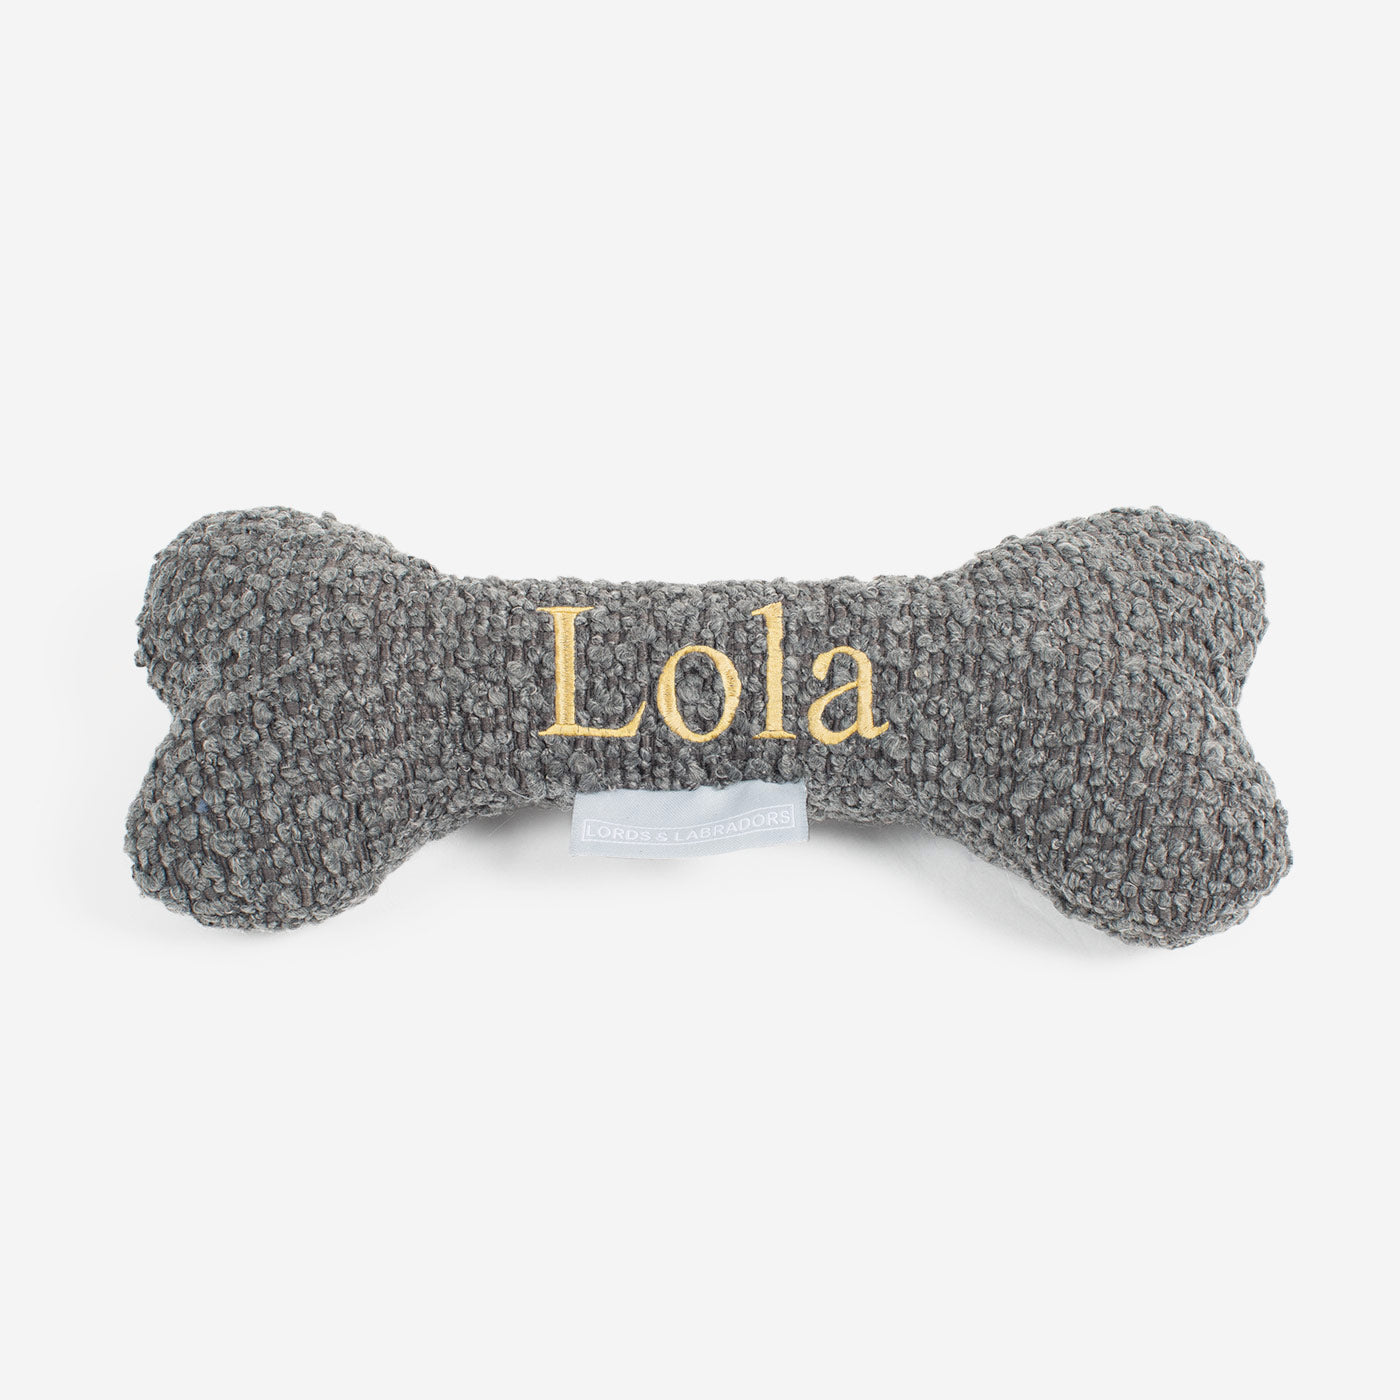 Present The Perfect Pet Playtime With Our Luxury Dog Bone Toy, In Stunning Granite Boucle! Available To Personalize Now at Lords & Labradors US